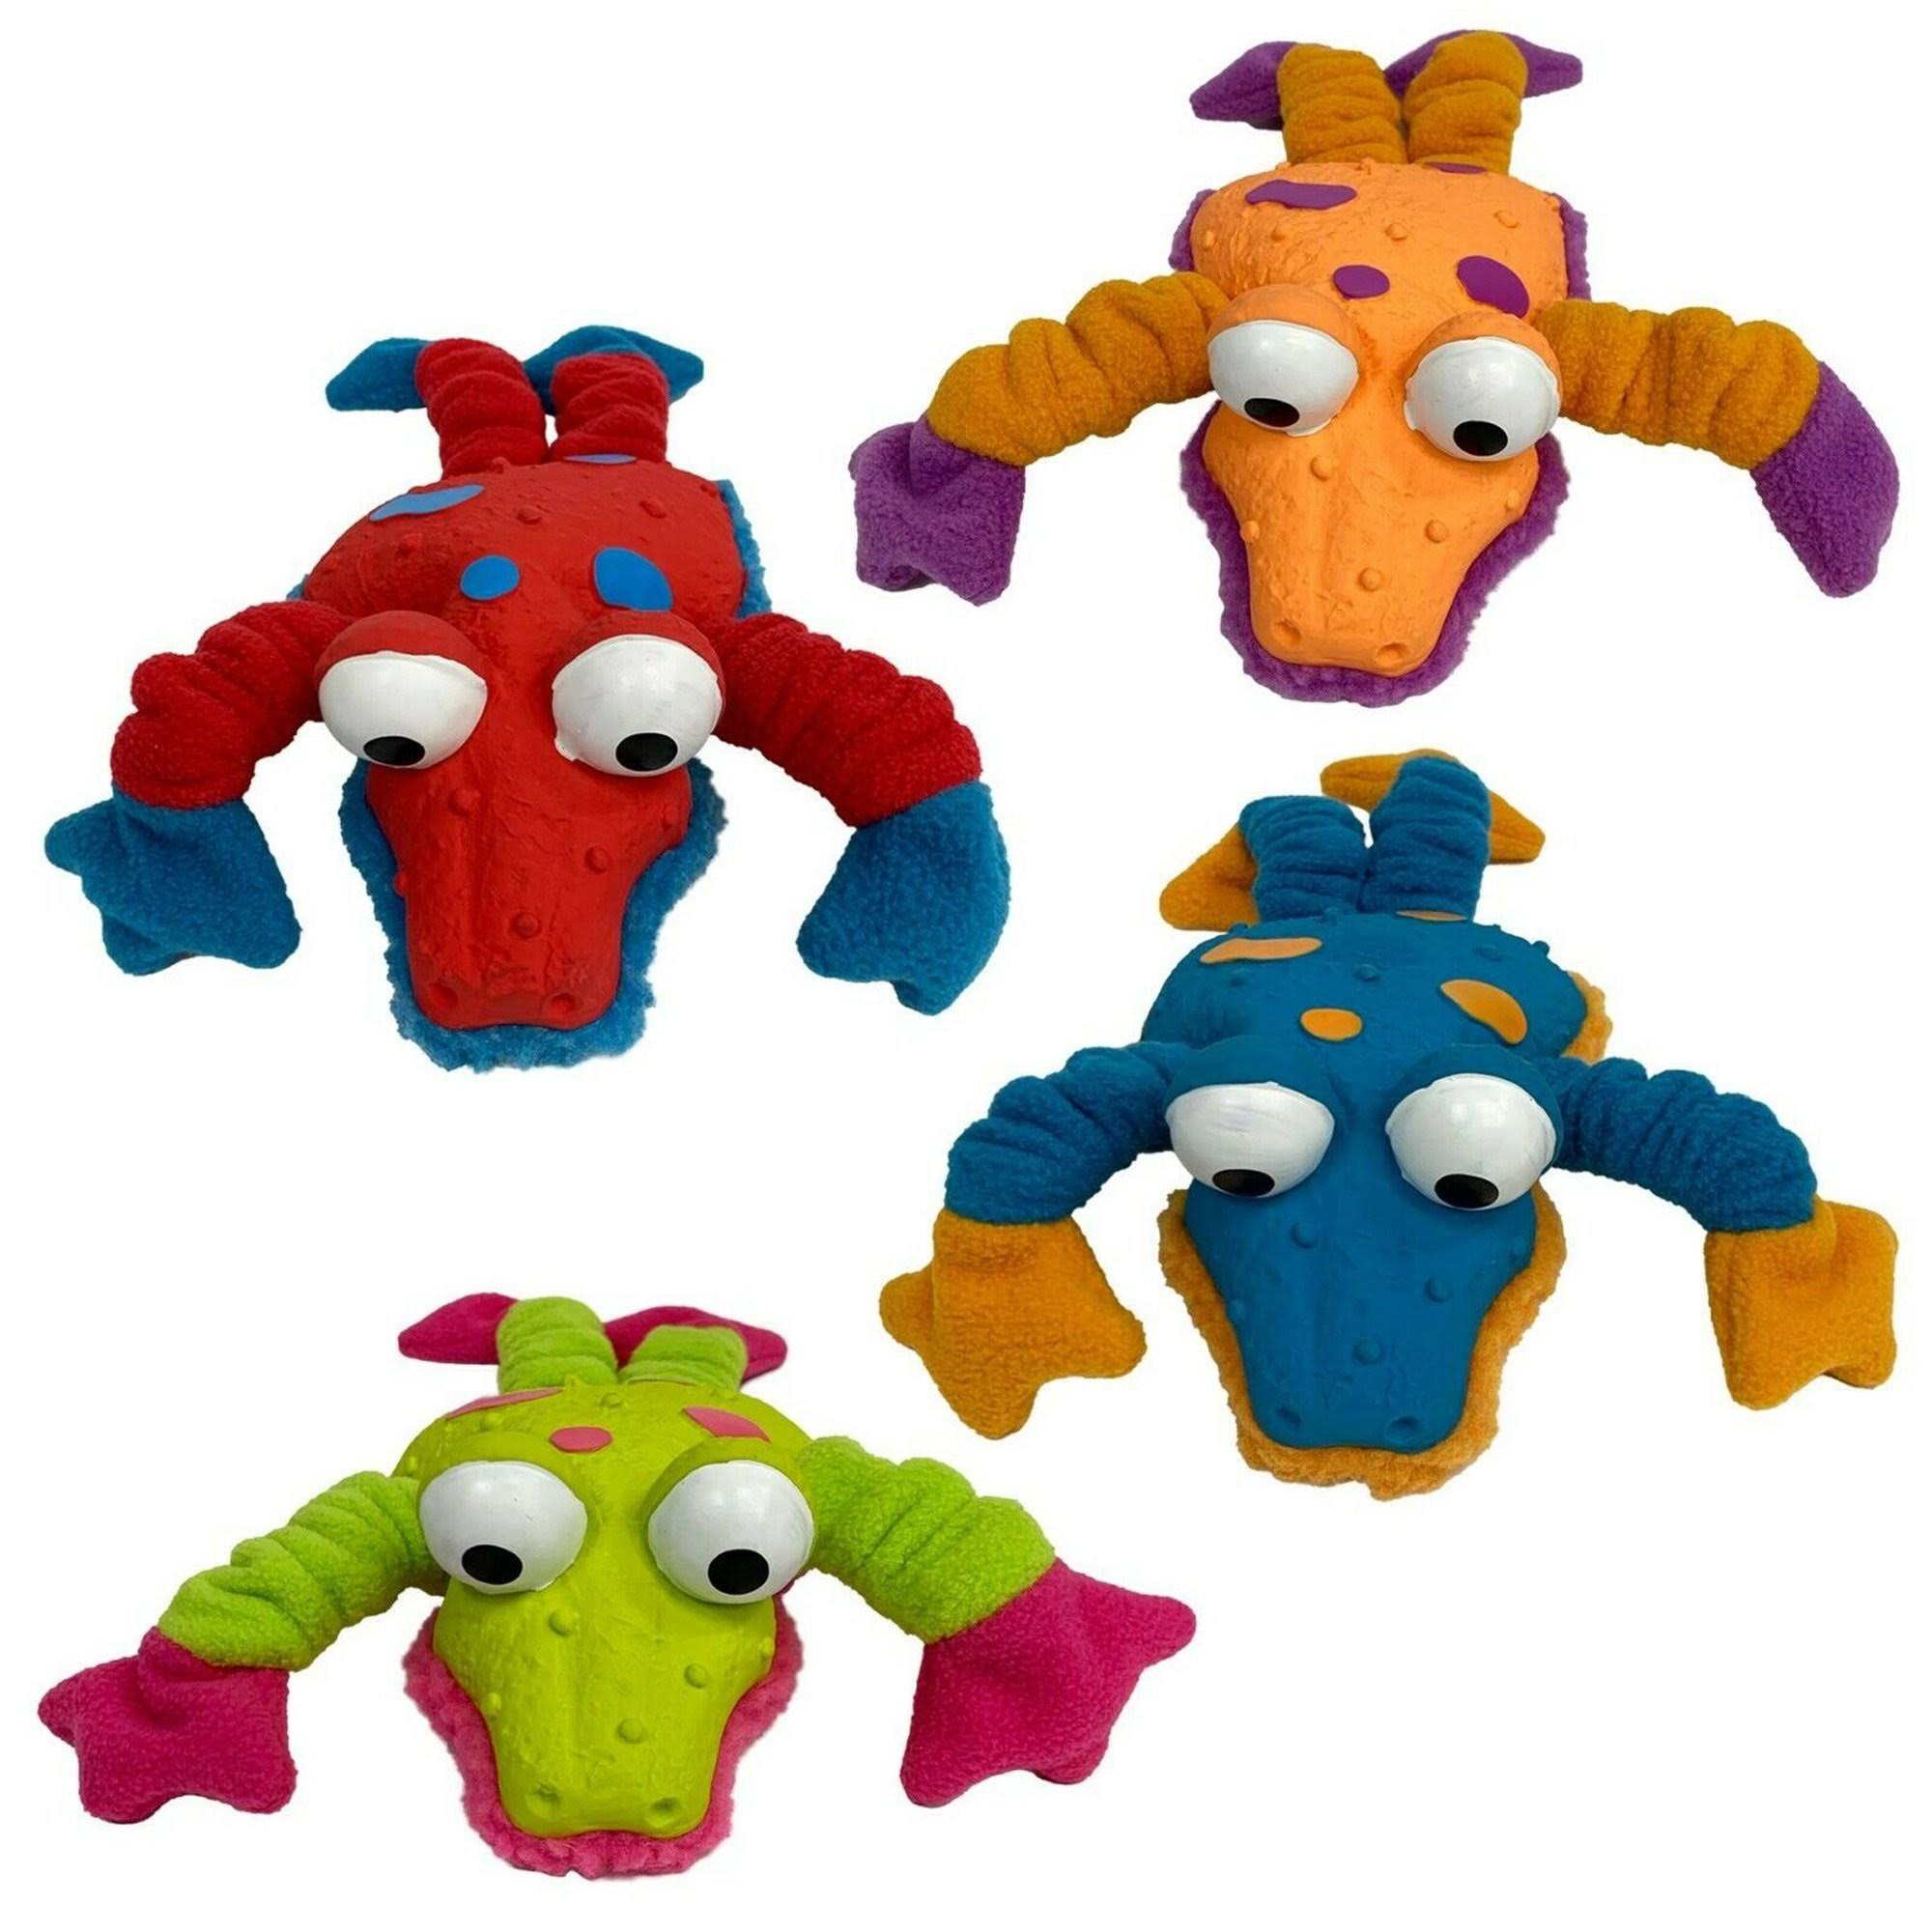 Multipet 60043685 9 in. Leaperz Dog Toy